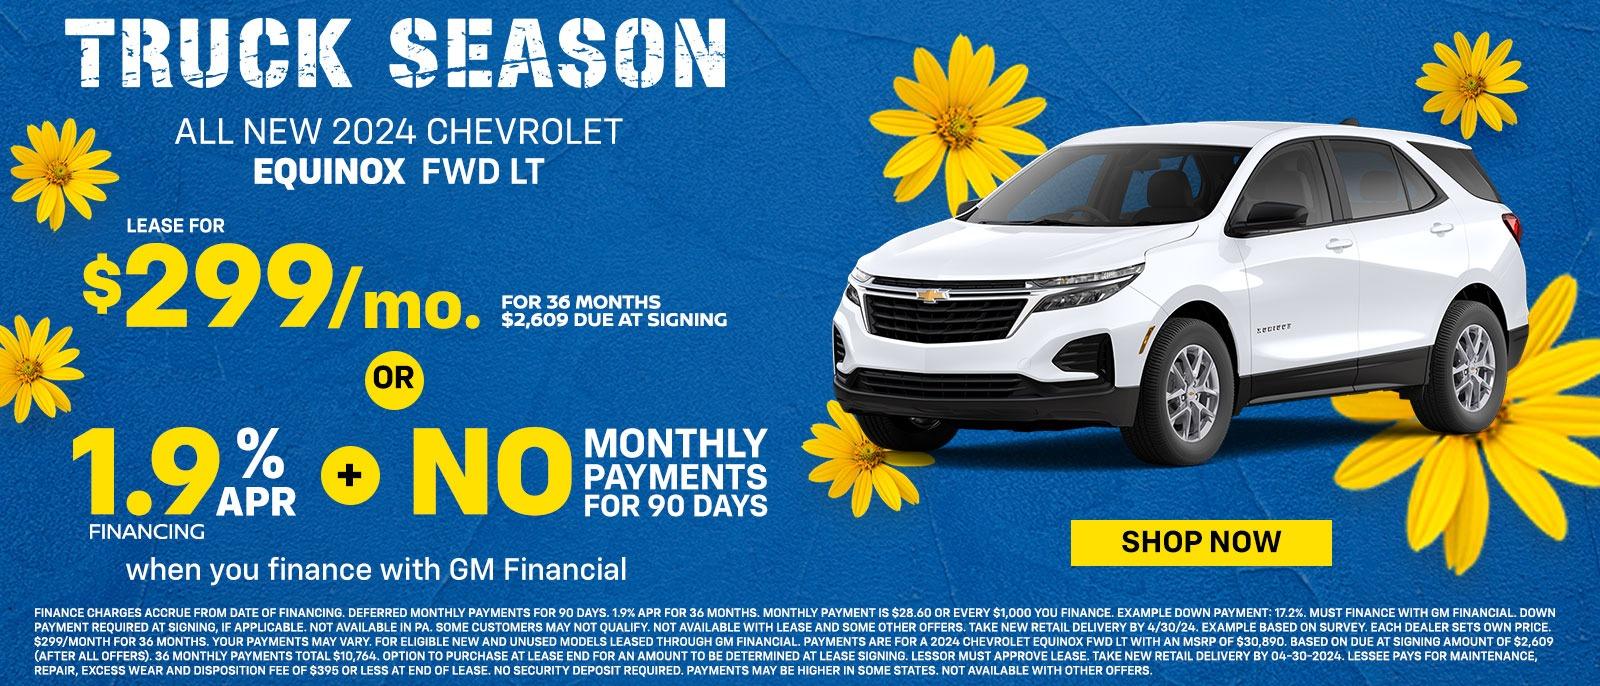 All new 2024 Chevrolet Equinox FWD LT
Lease for 
$299/mo. for 36 months
$2,609 Due at signing
OR
1.9% APR Financing
+
 No monthly payments for 90 days